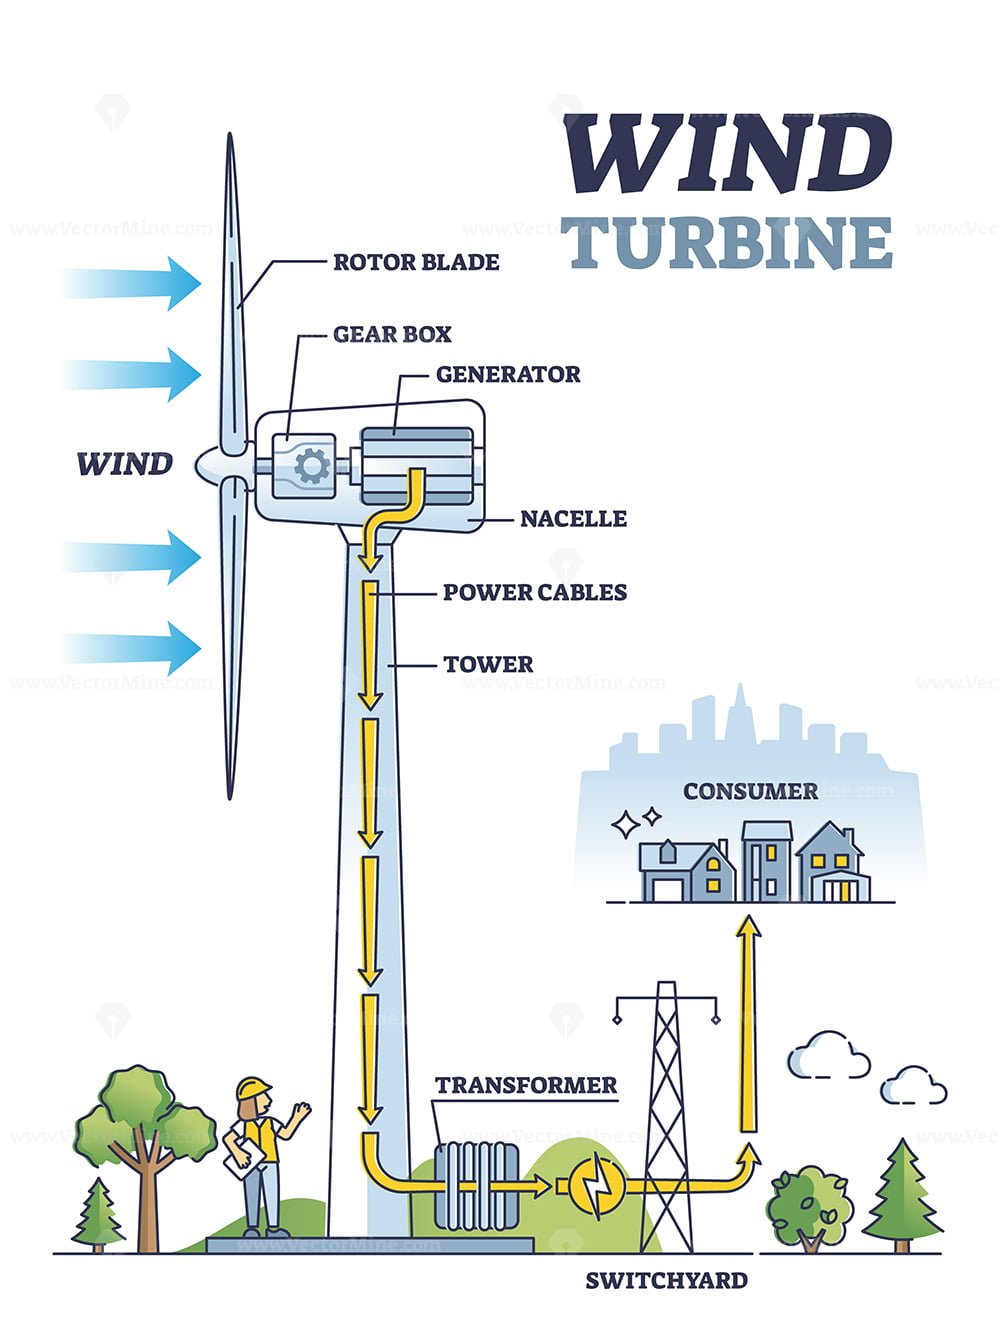 Wind turbine work principle with mechanical inner structure outline